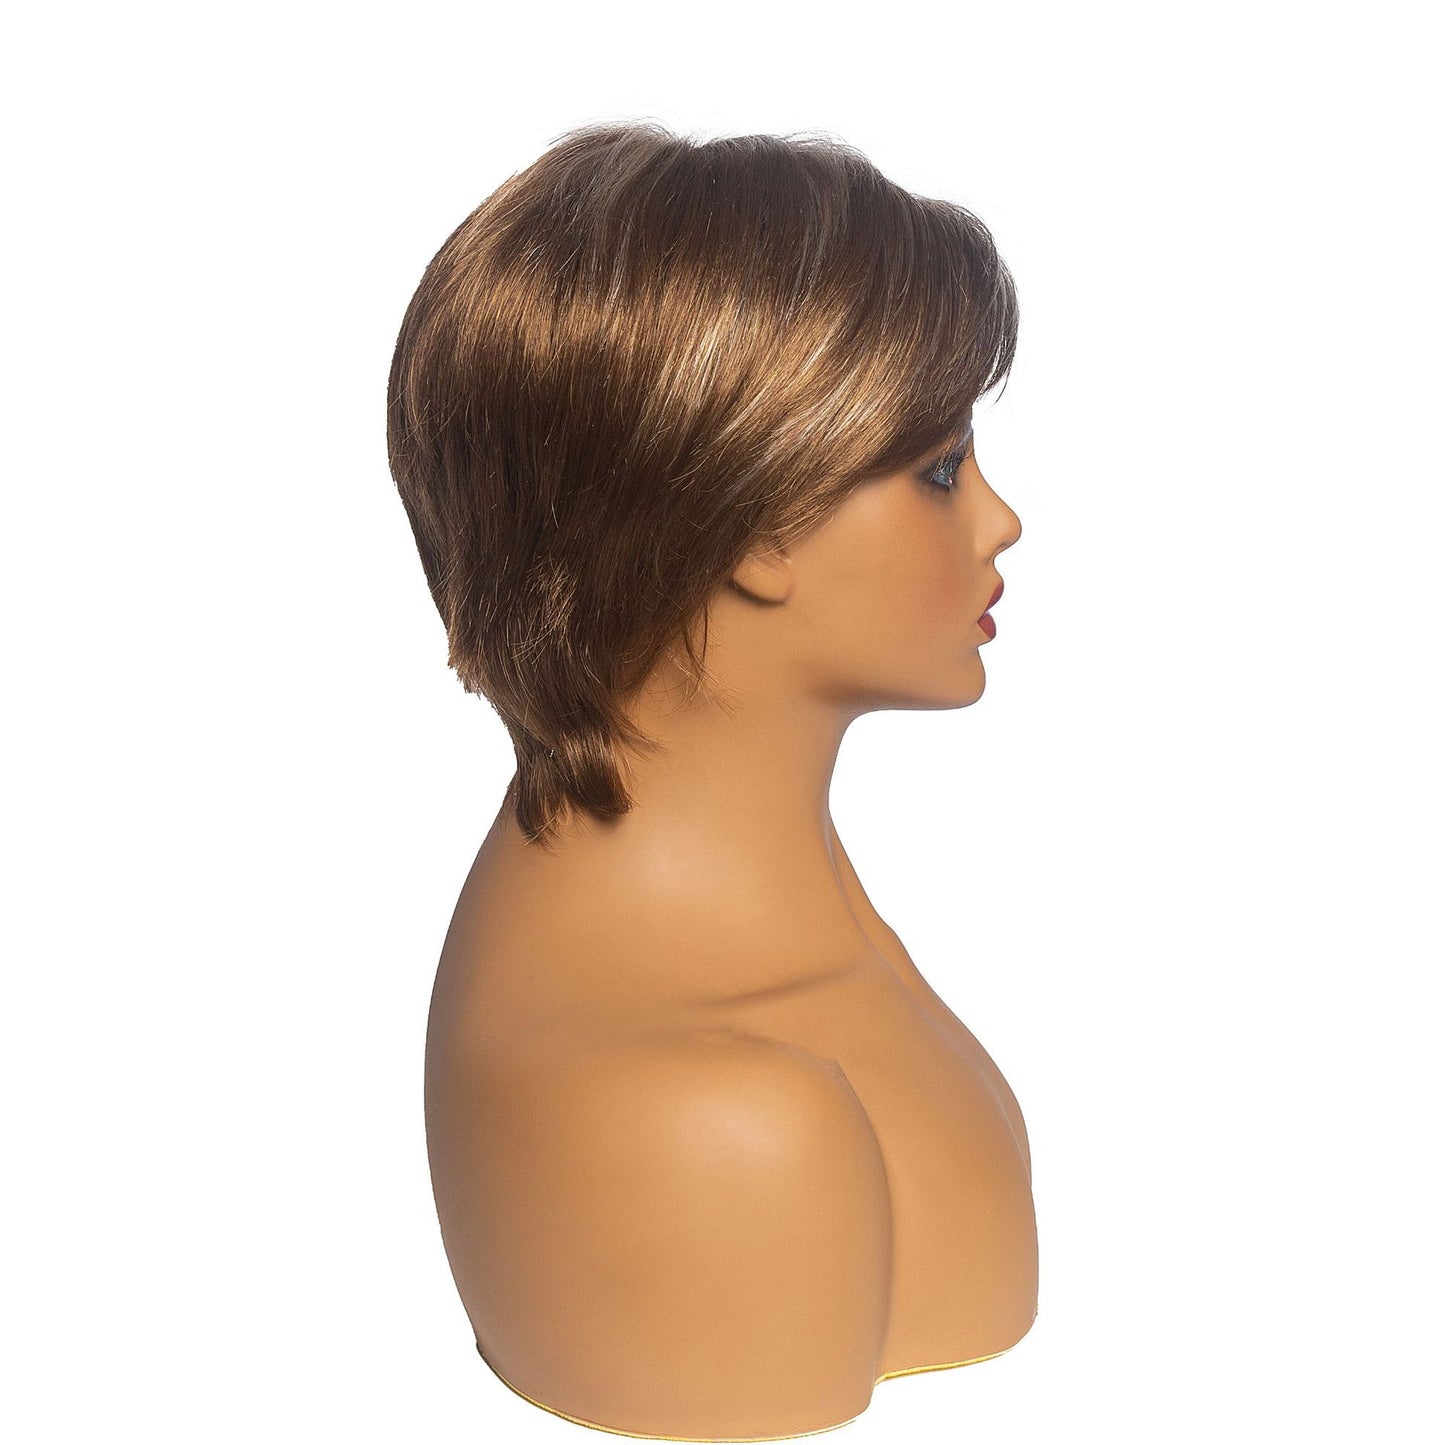 Short Straight Ombre Blonde Wig with Bang for Women Synthetic Natural Hair Wig Dark Roots Heat Resistant Wigs